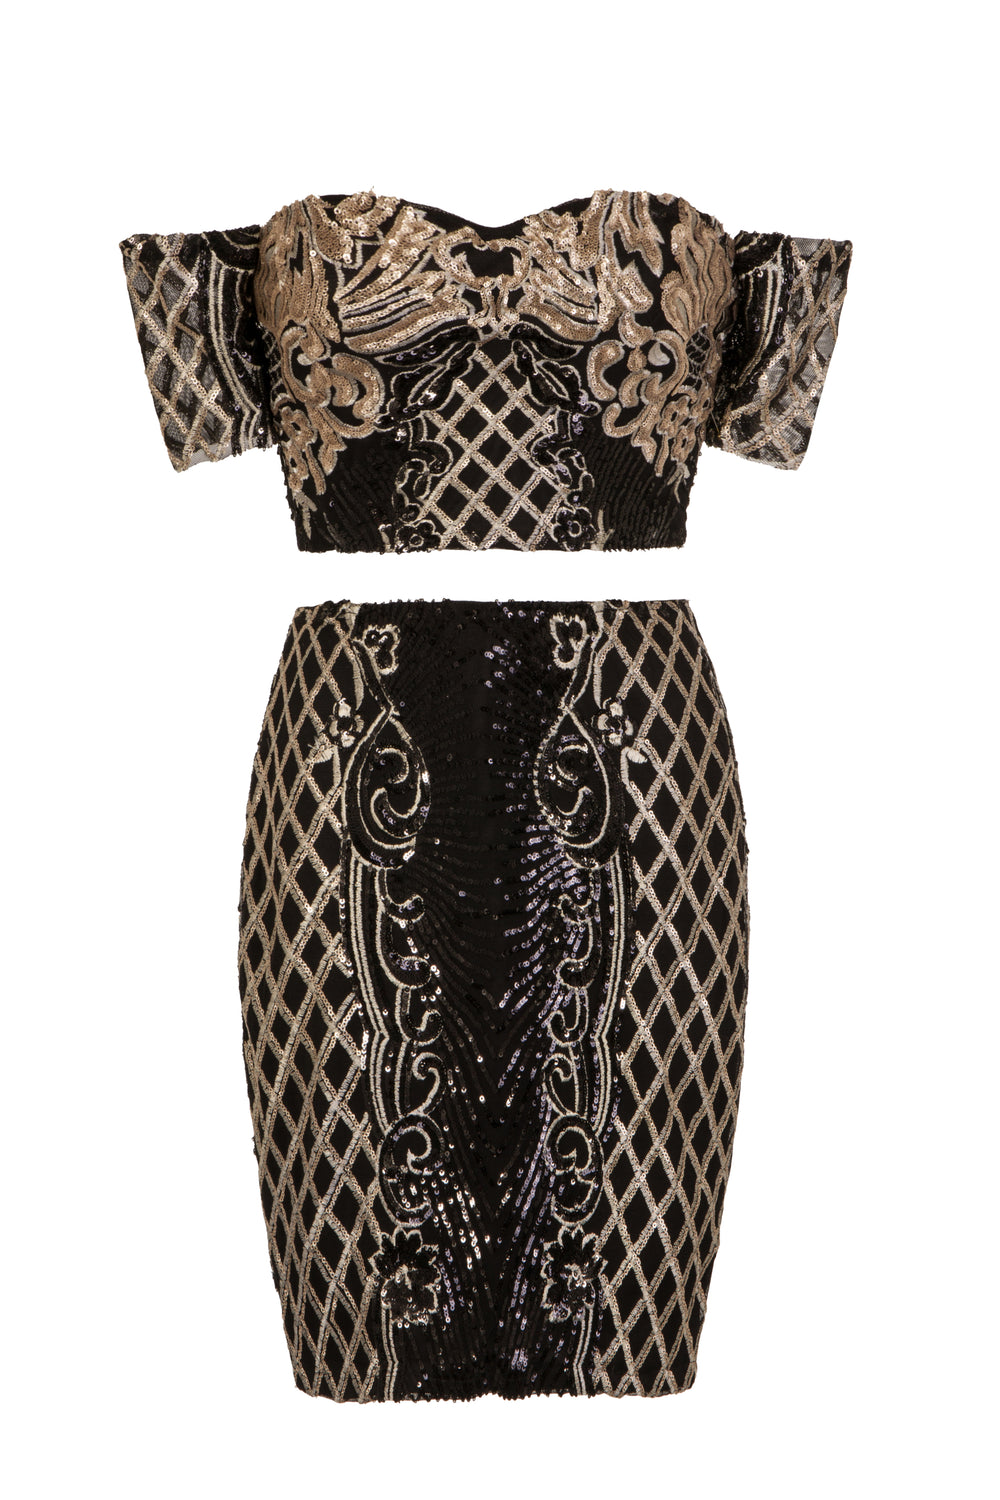 Baddie Vip Black Gold Sequin & Embroidery Two Piece Skirt Top Co Ord Set